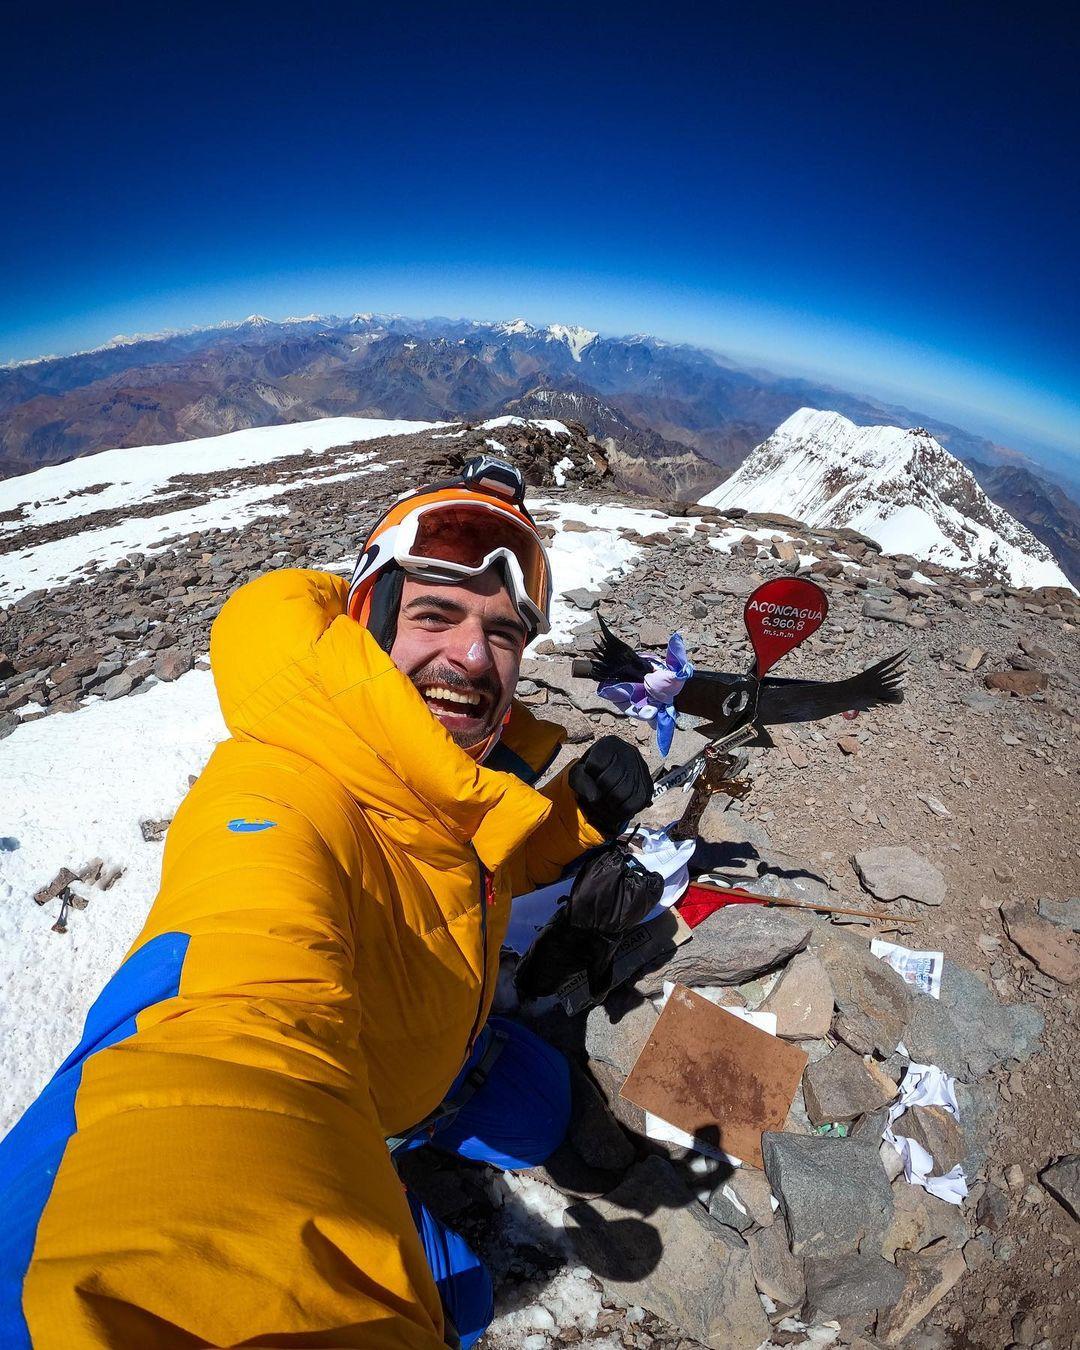 class="content__text"
 🏔️ ACONCAGUA CONQUERED 🏔️

The moment I summited the tallest mountain in the southern and western hemisphere, tears burst into my eyes and I asked my guide @juancruzrodriguez23 to crouch as he is a bit taller than me. 

It was night and winter in the Himalayas and nobody was on the summit with us, which made us the tallest standing people on Earth at that moment. Out of 8,000,000,000. The tallest. Priceless feeling for a short fucker like me.

Hardest thing I’ve ever done.

 #aconcagua #ElCumbre #done 
 